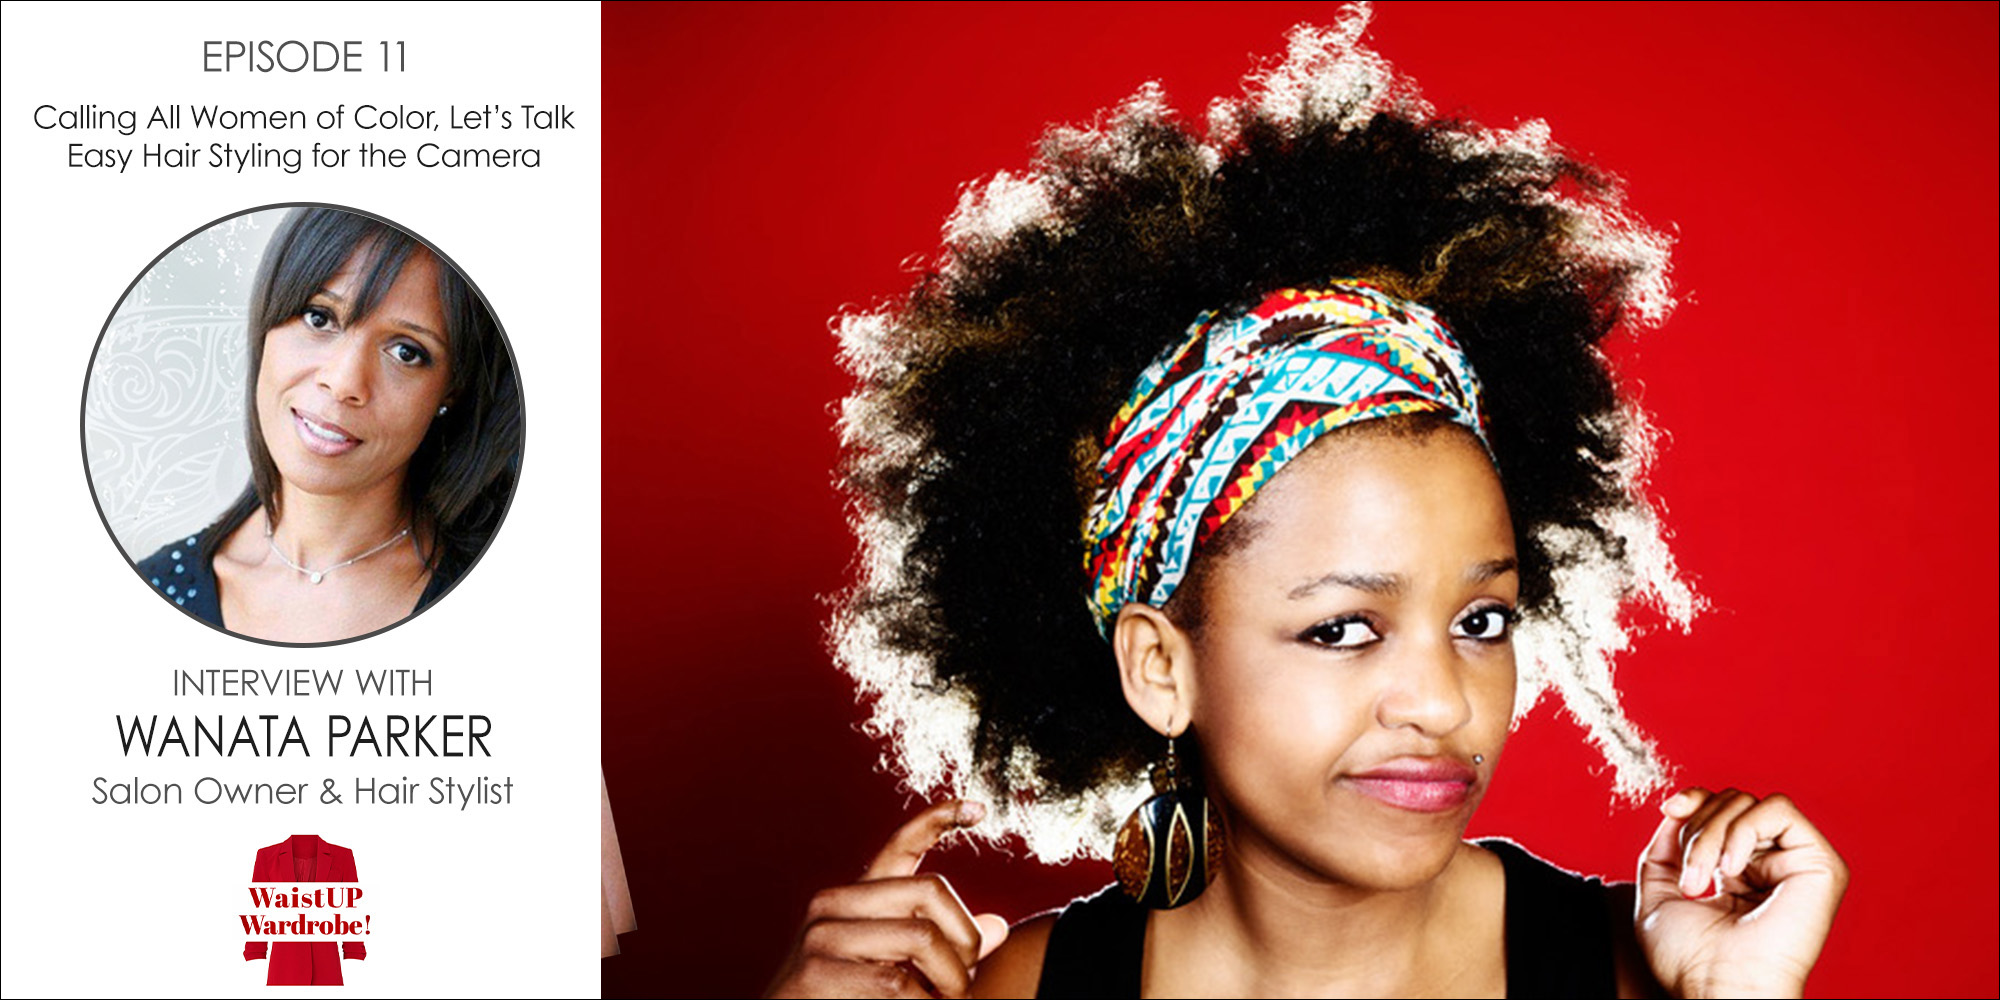 Image of Wanata Parker, a salon owner and hair stylist, advertising her podcast for women of color and easy hair styling